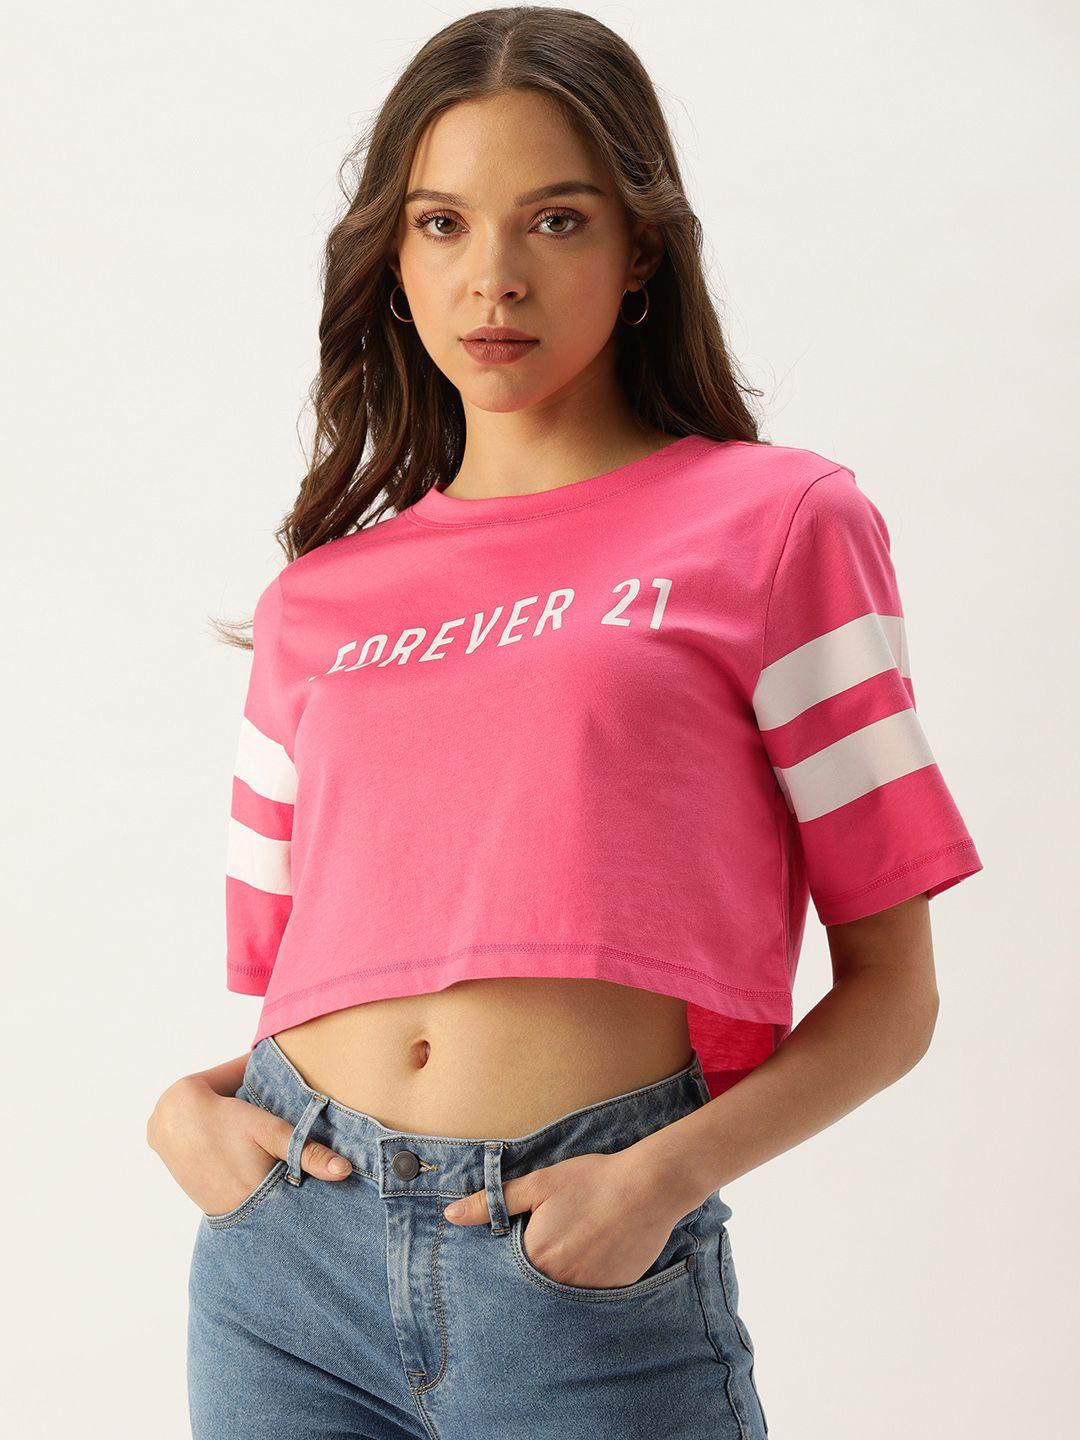 forever 21 women pink & white brand logo printed pure cotton round neck crop top